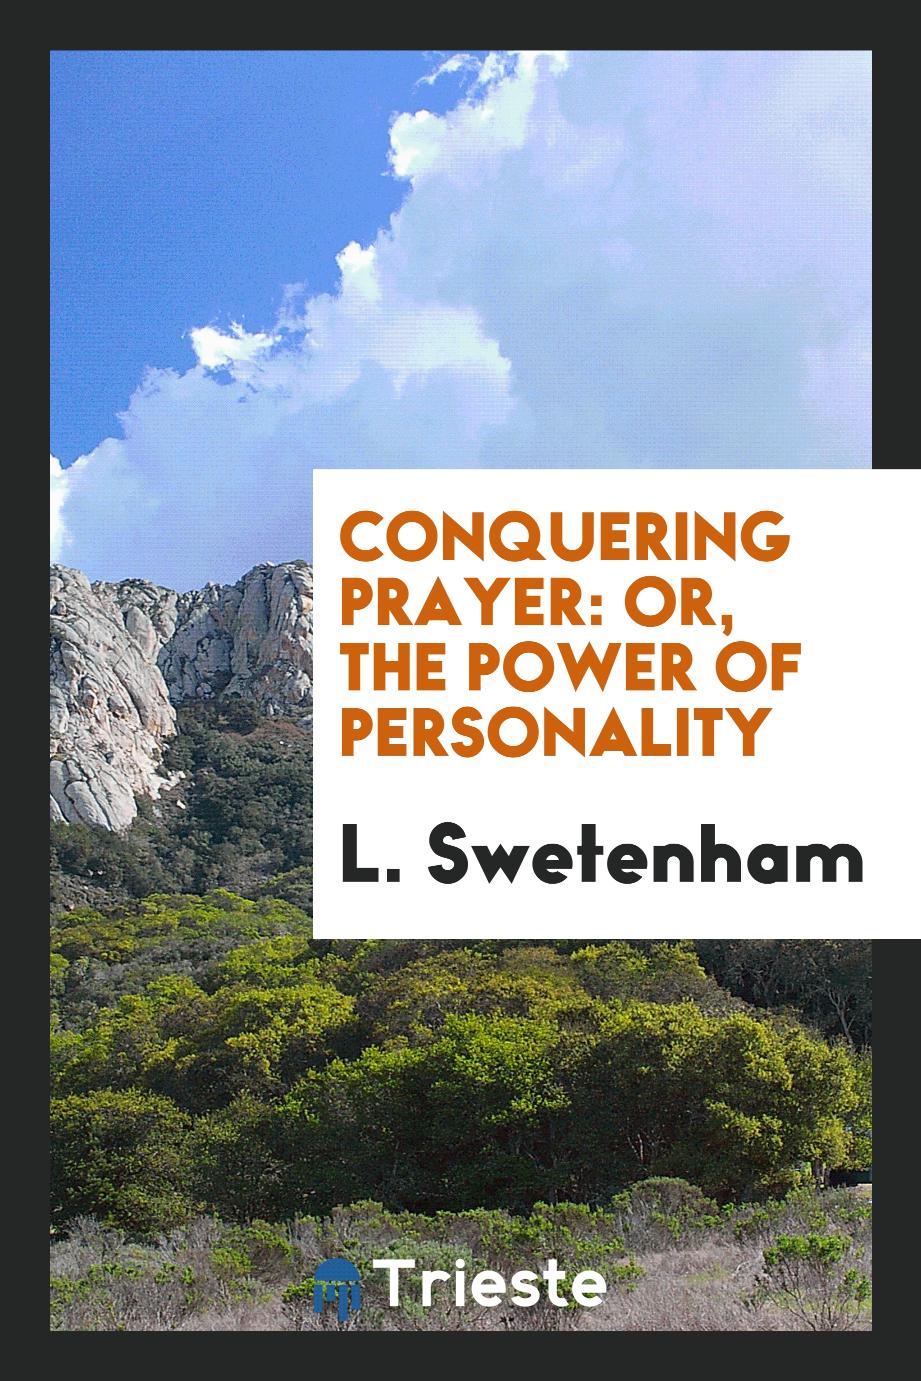 Conquering prayer: or, The power of personality